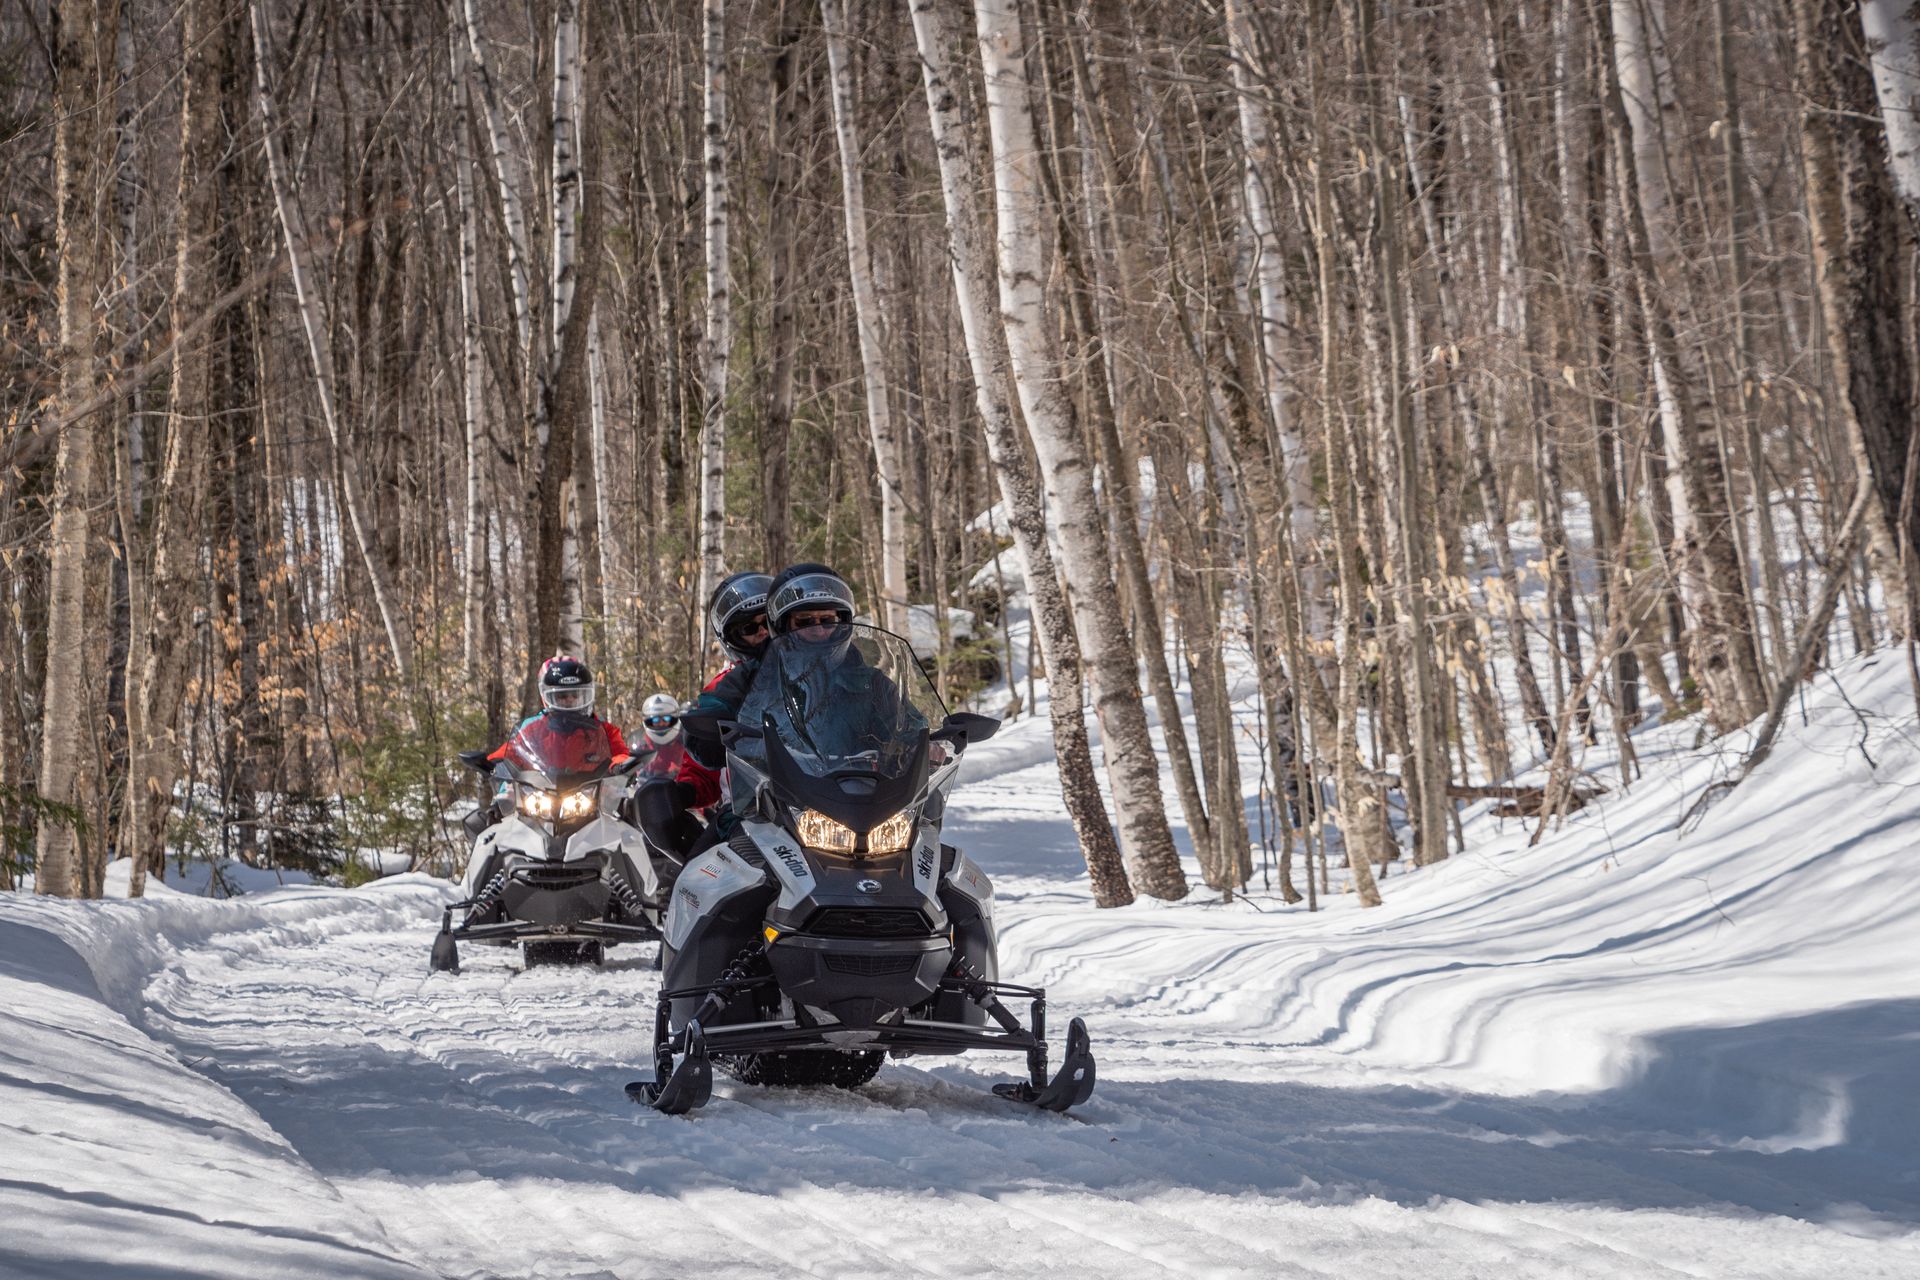 a group of people are riding snowmobiles down a snowy path